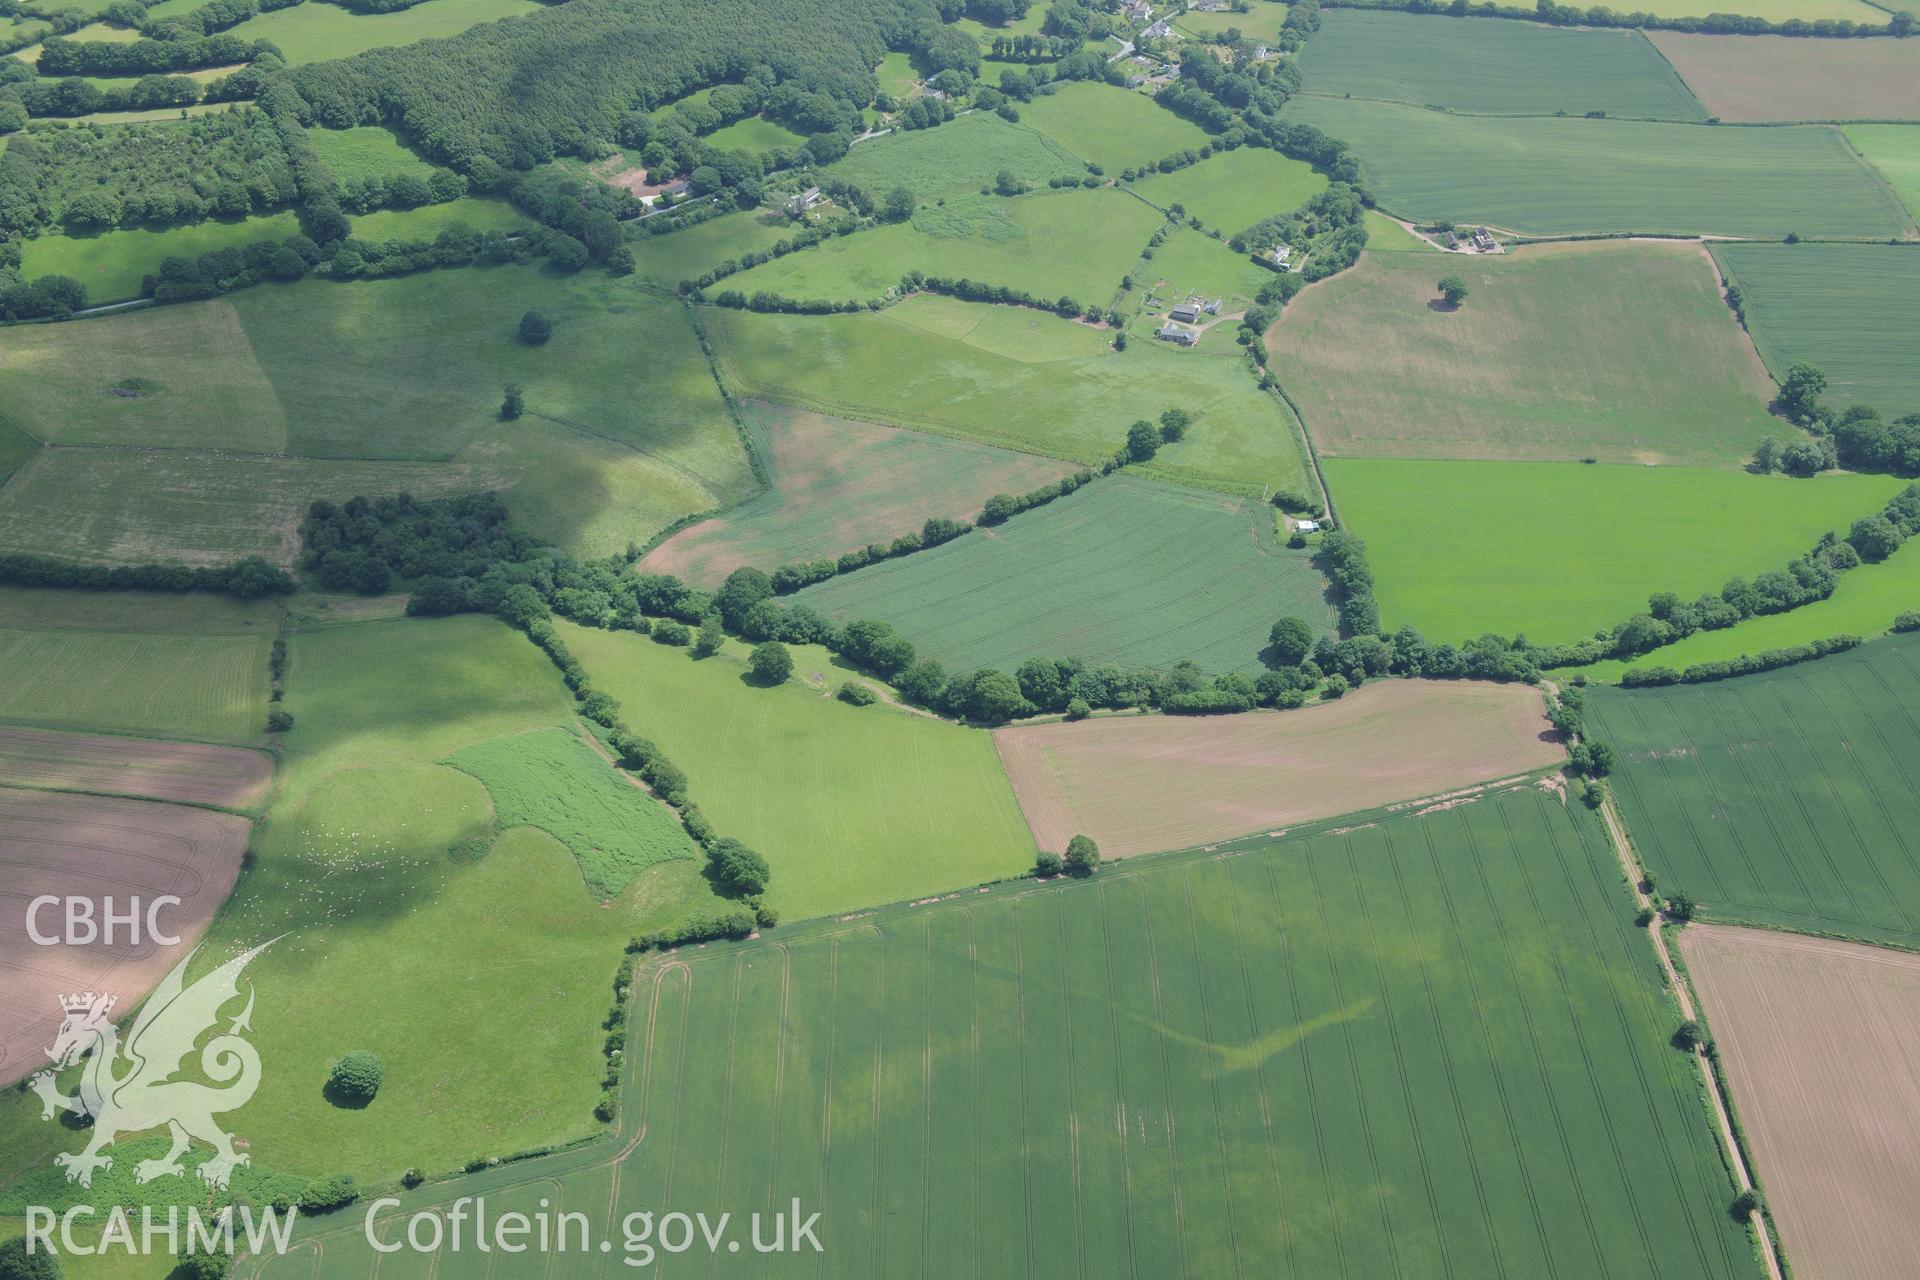 Ffynnon Gaer Hillfort and possible trackway measuring 200m running south west from the hillfort. Oblique aerial photograph taken during the Royal Commission's programme of archaeological aerial reconnaissance by Toby Driver on 29th June 2015.